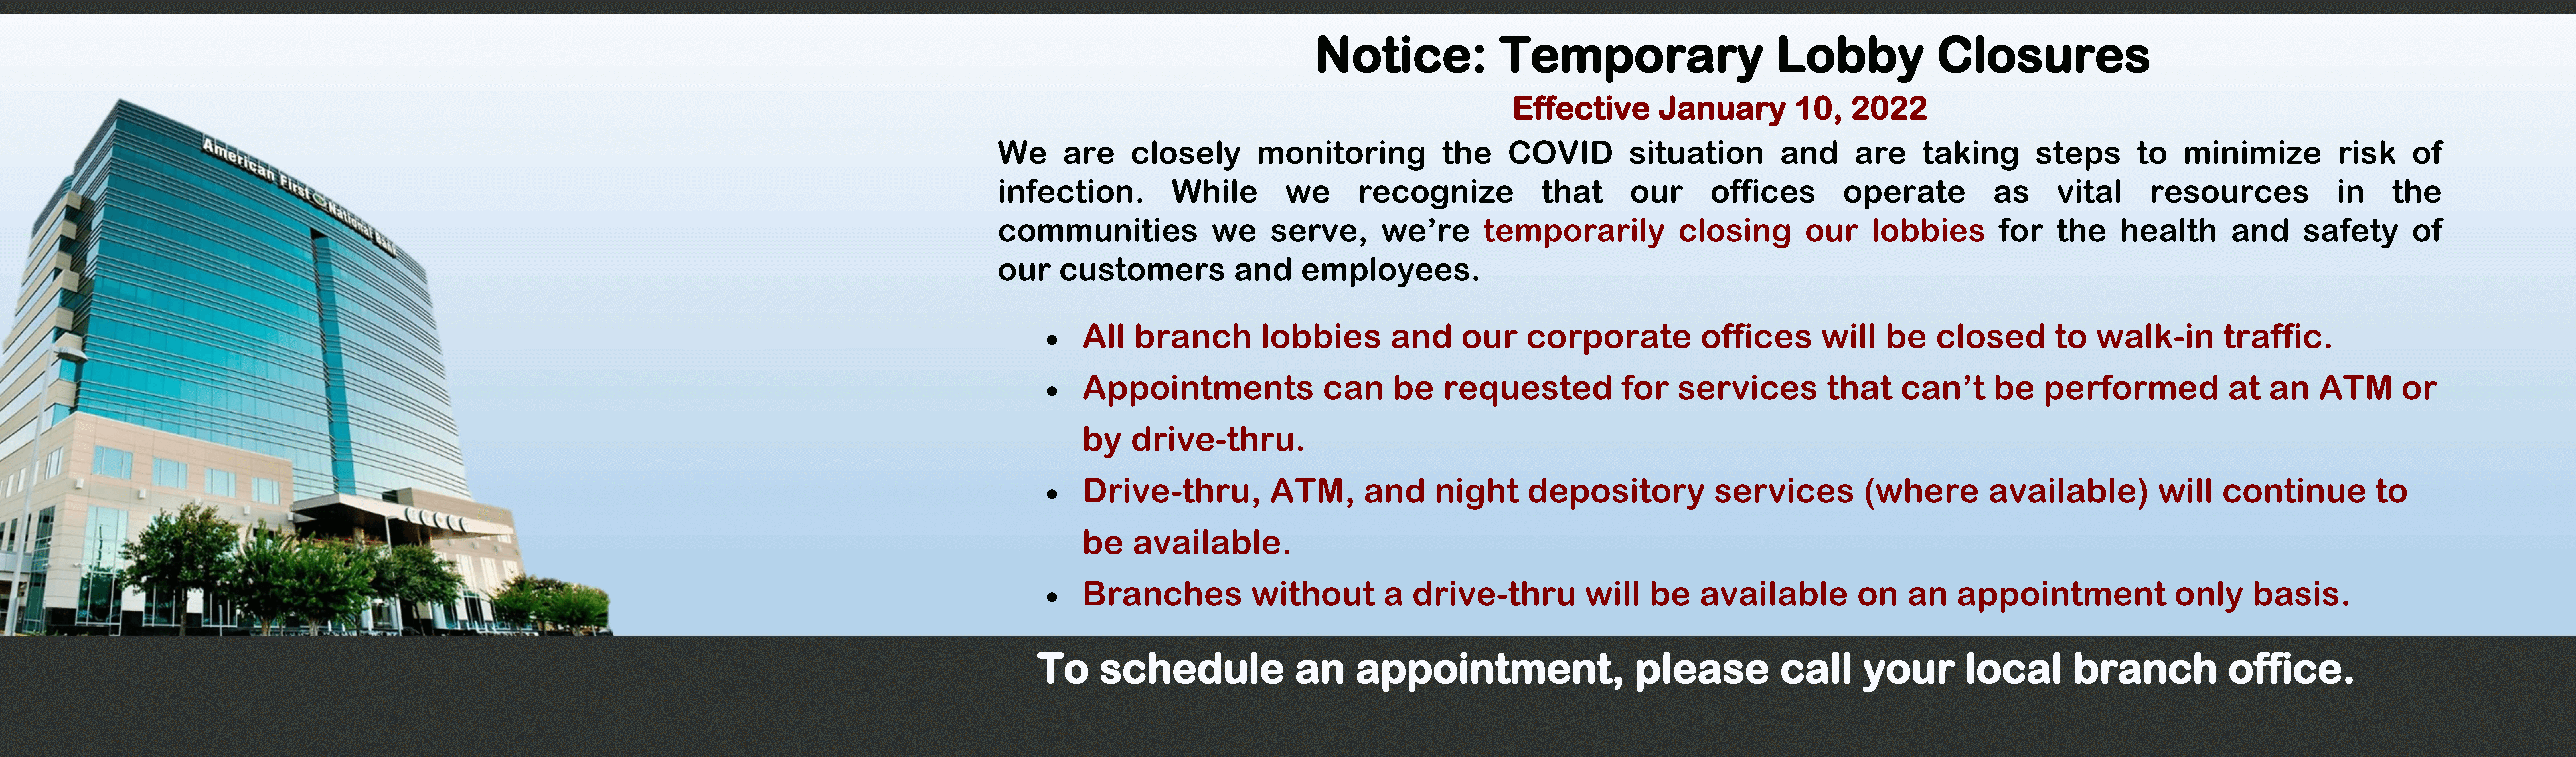 We are closing our lobbies due to COVID. Please call to make an appointment.